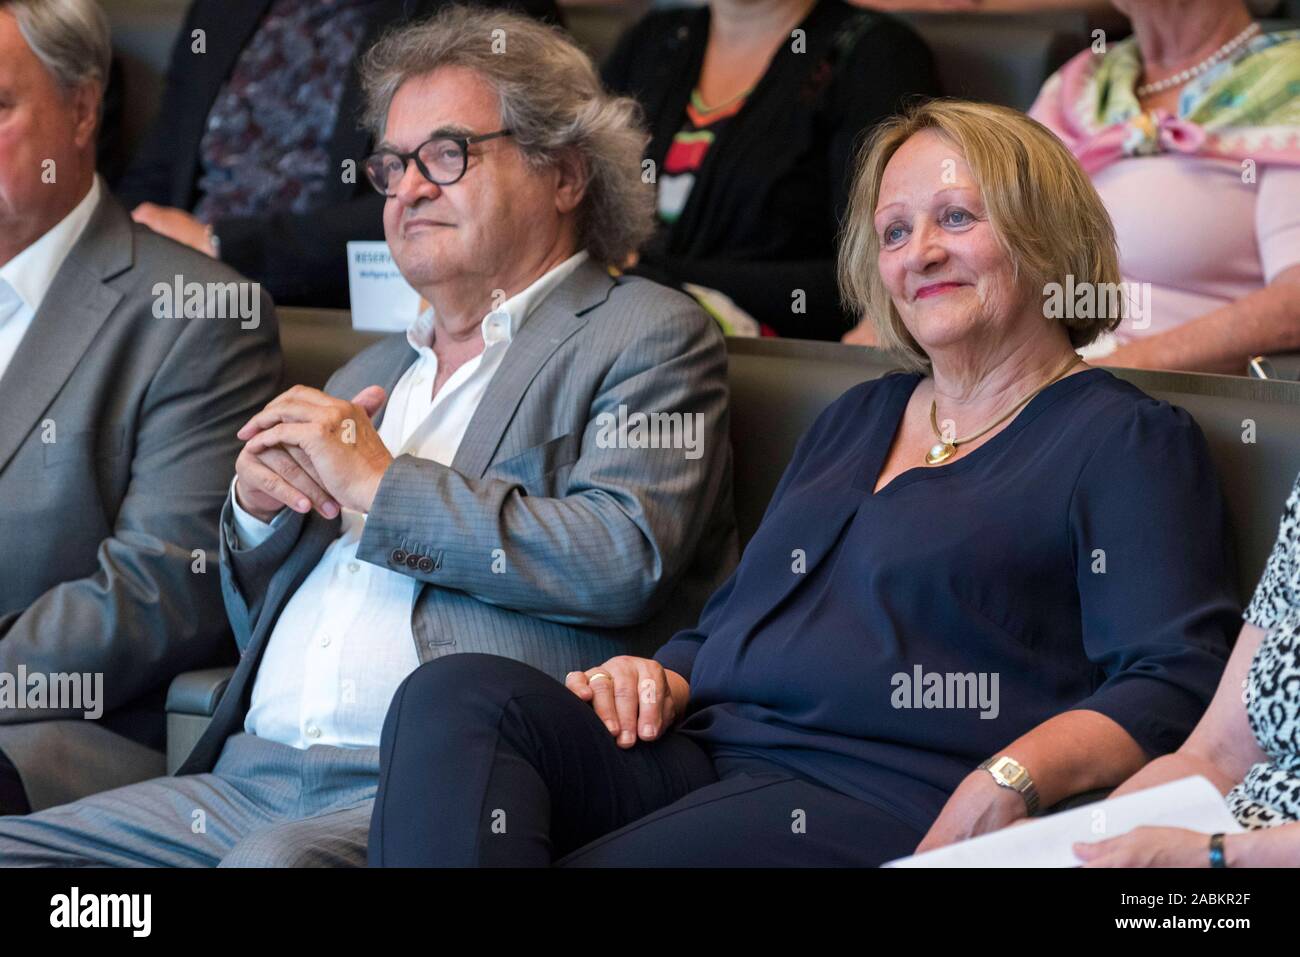 Sabine Leutheusser-Schnarrenberger, former Federal Minister of Justice, sits next to Helmut Markwort in the new Irenensaal of the publishing house Wort und Bild in Baierbrunn. [automated translation] Stock Photo